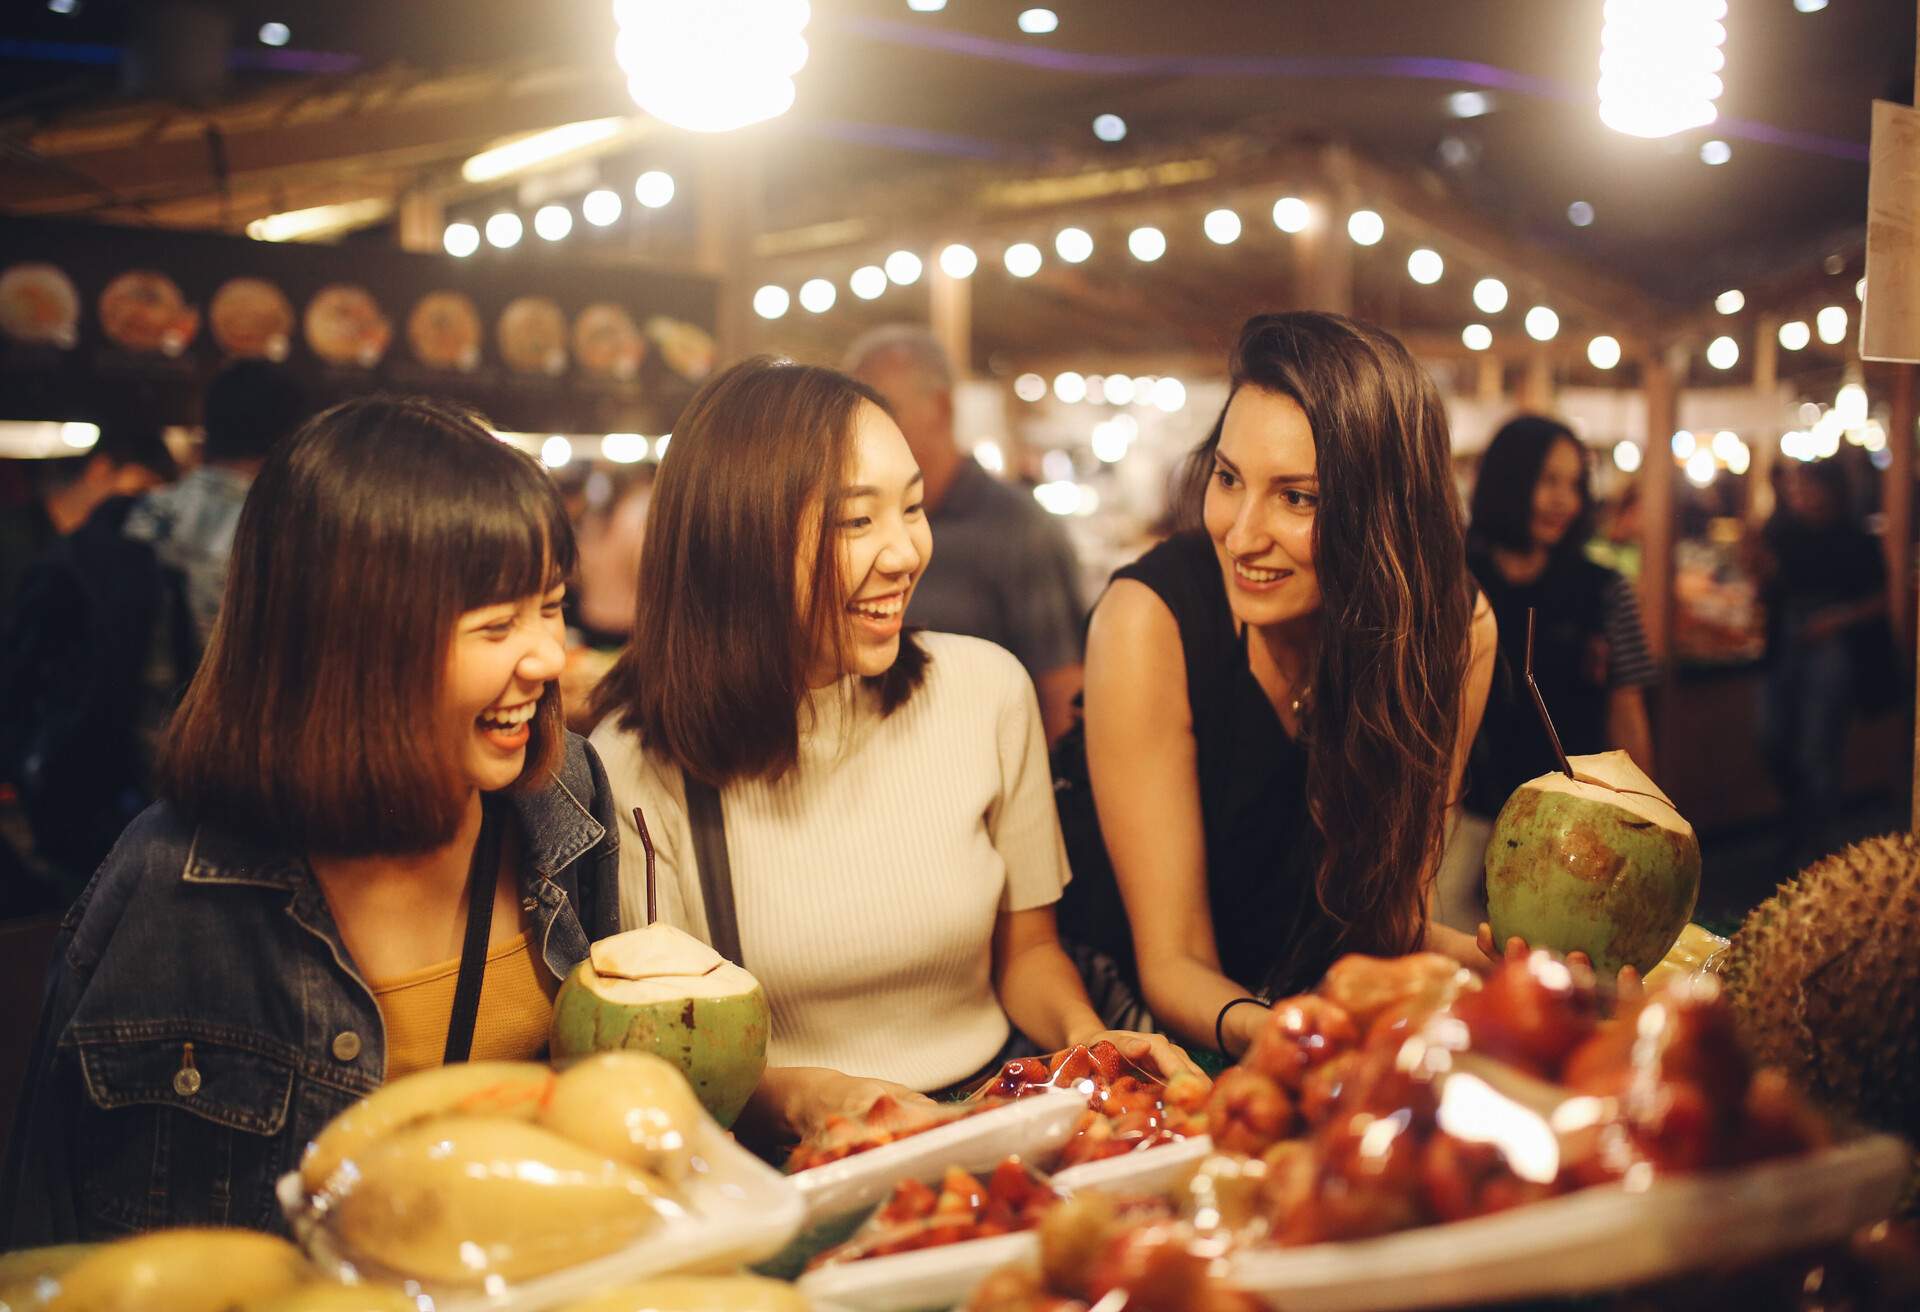 Three women smiling in front of a fruit display on a night market.